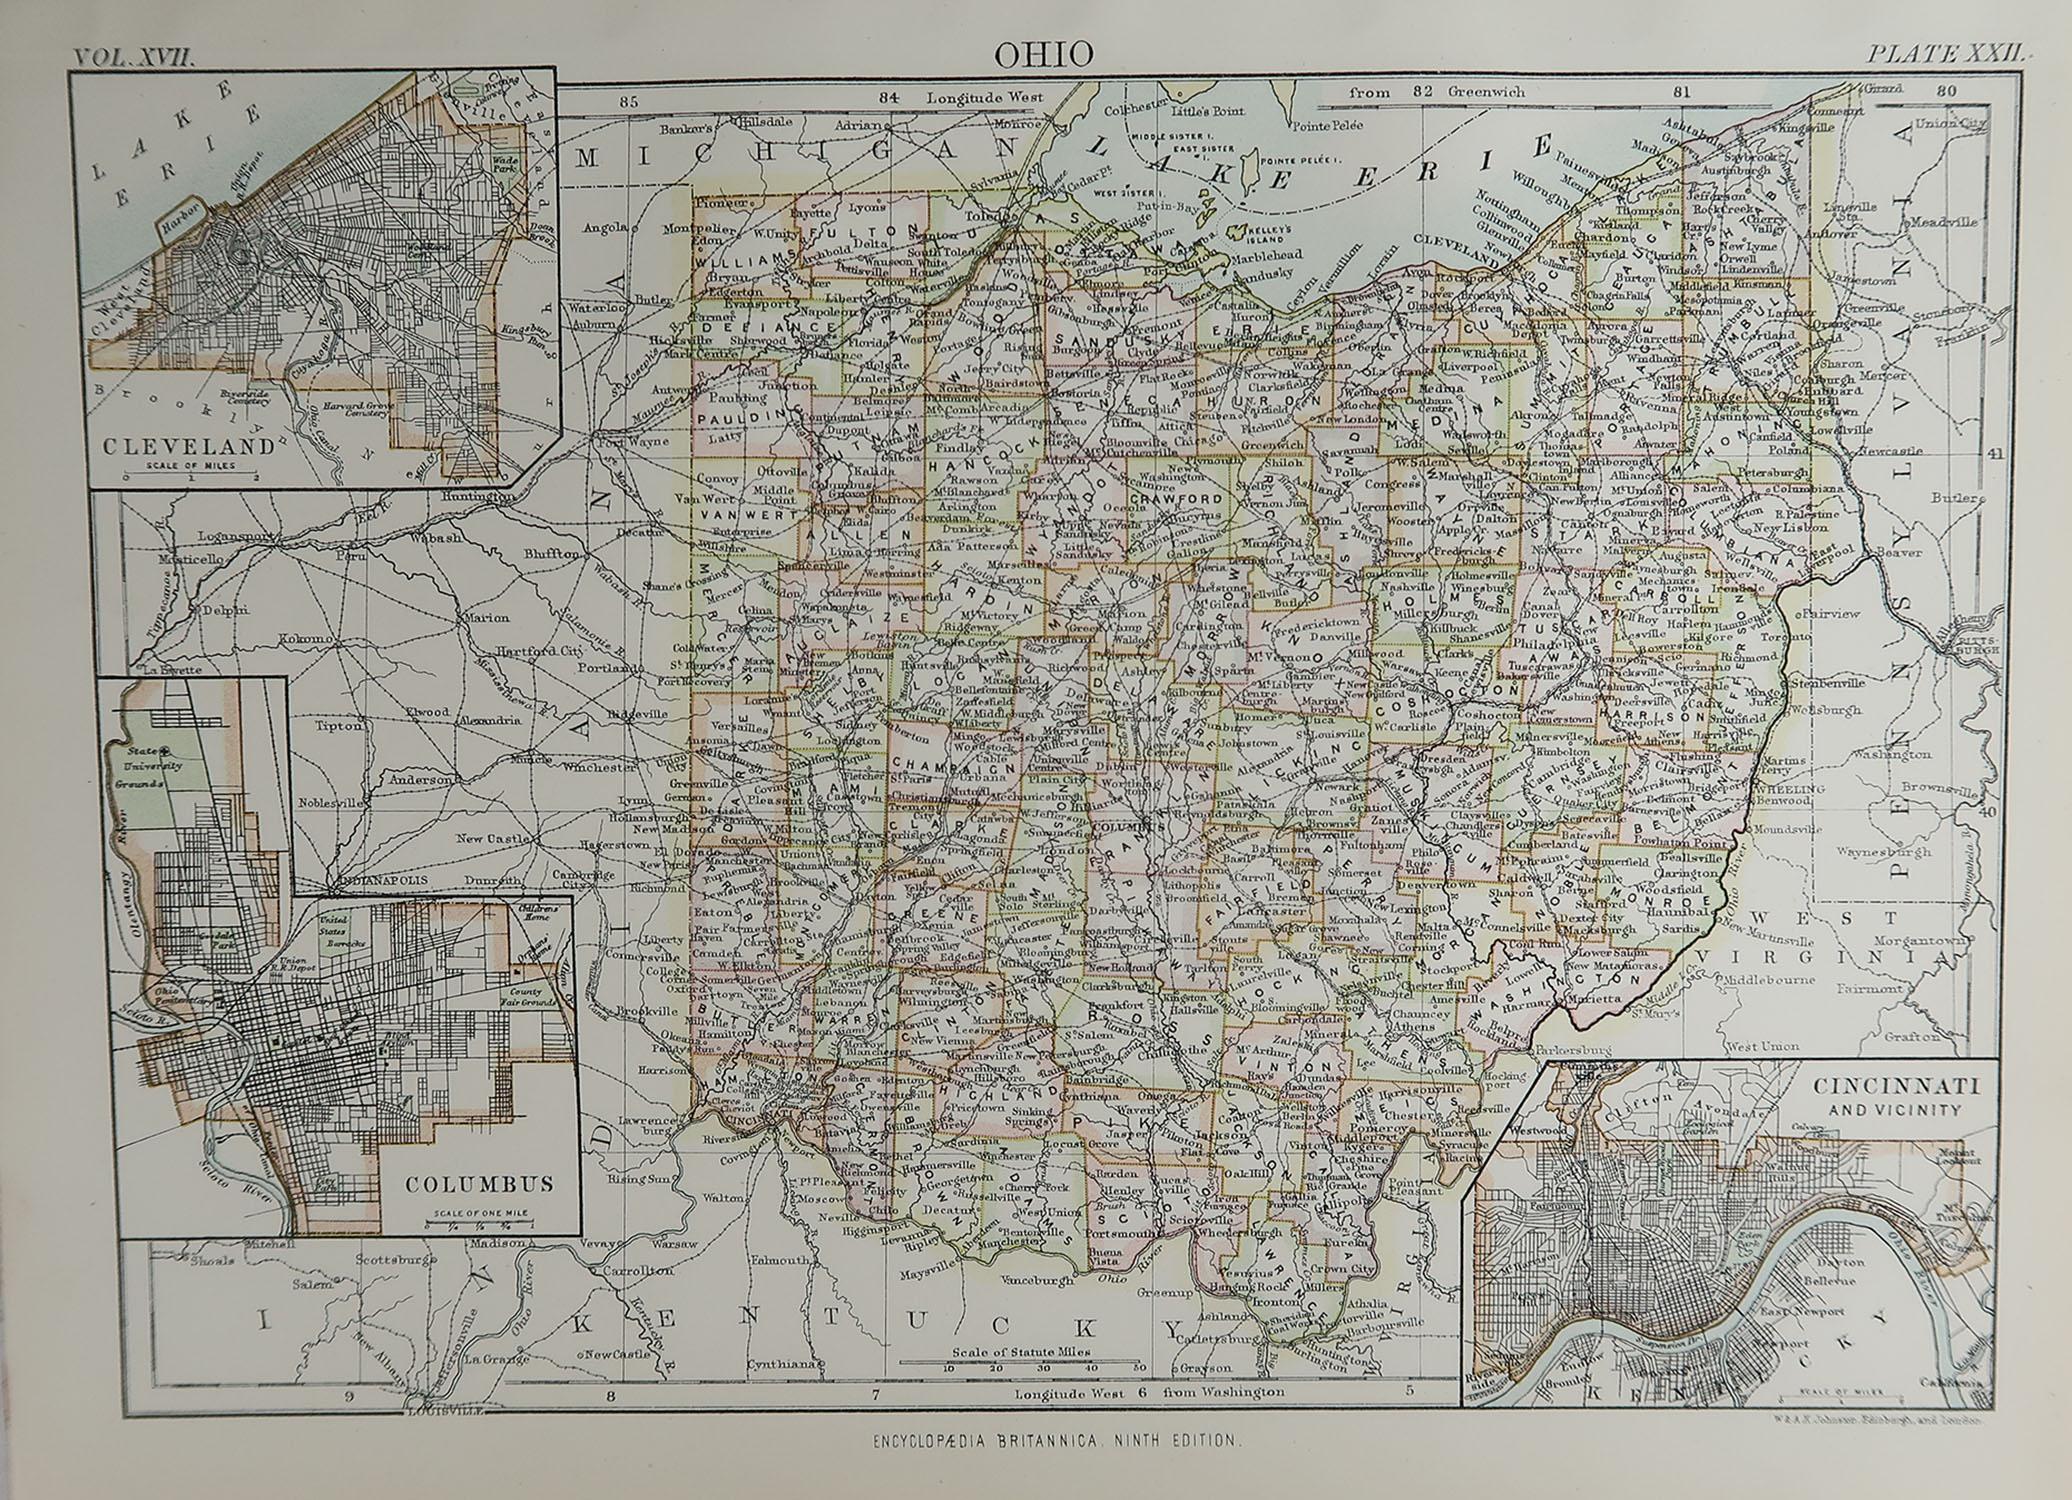 Great map of Ohio

Drawn and Engraved by W. & A.K. Johnston

Published By A & C Black, Edinburgh.

Original colour

Unframed.








